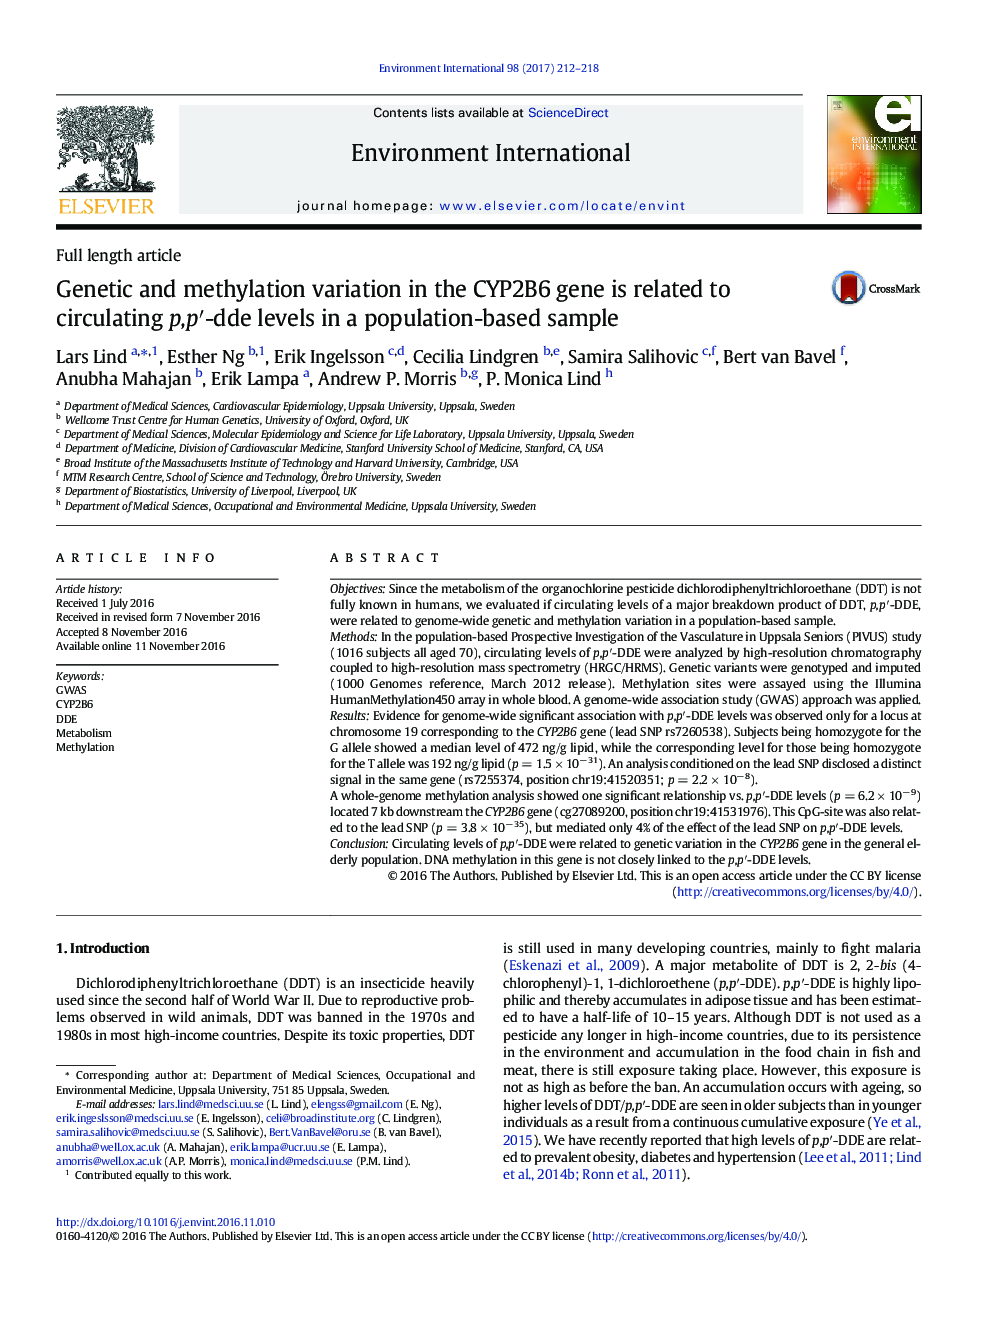 Full length articleGenetic and methylation variation in the CYP2B6 gene is related to circulating p,pâ²-dde levels in a population-based sample